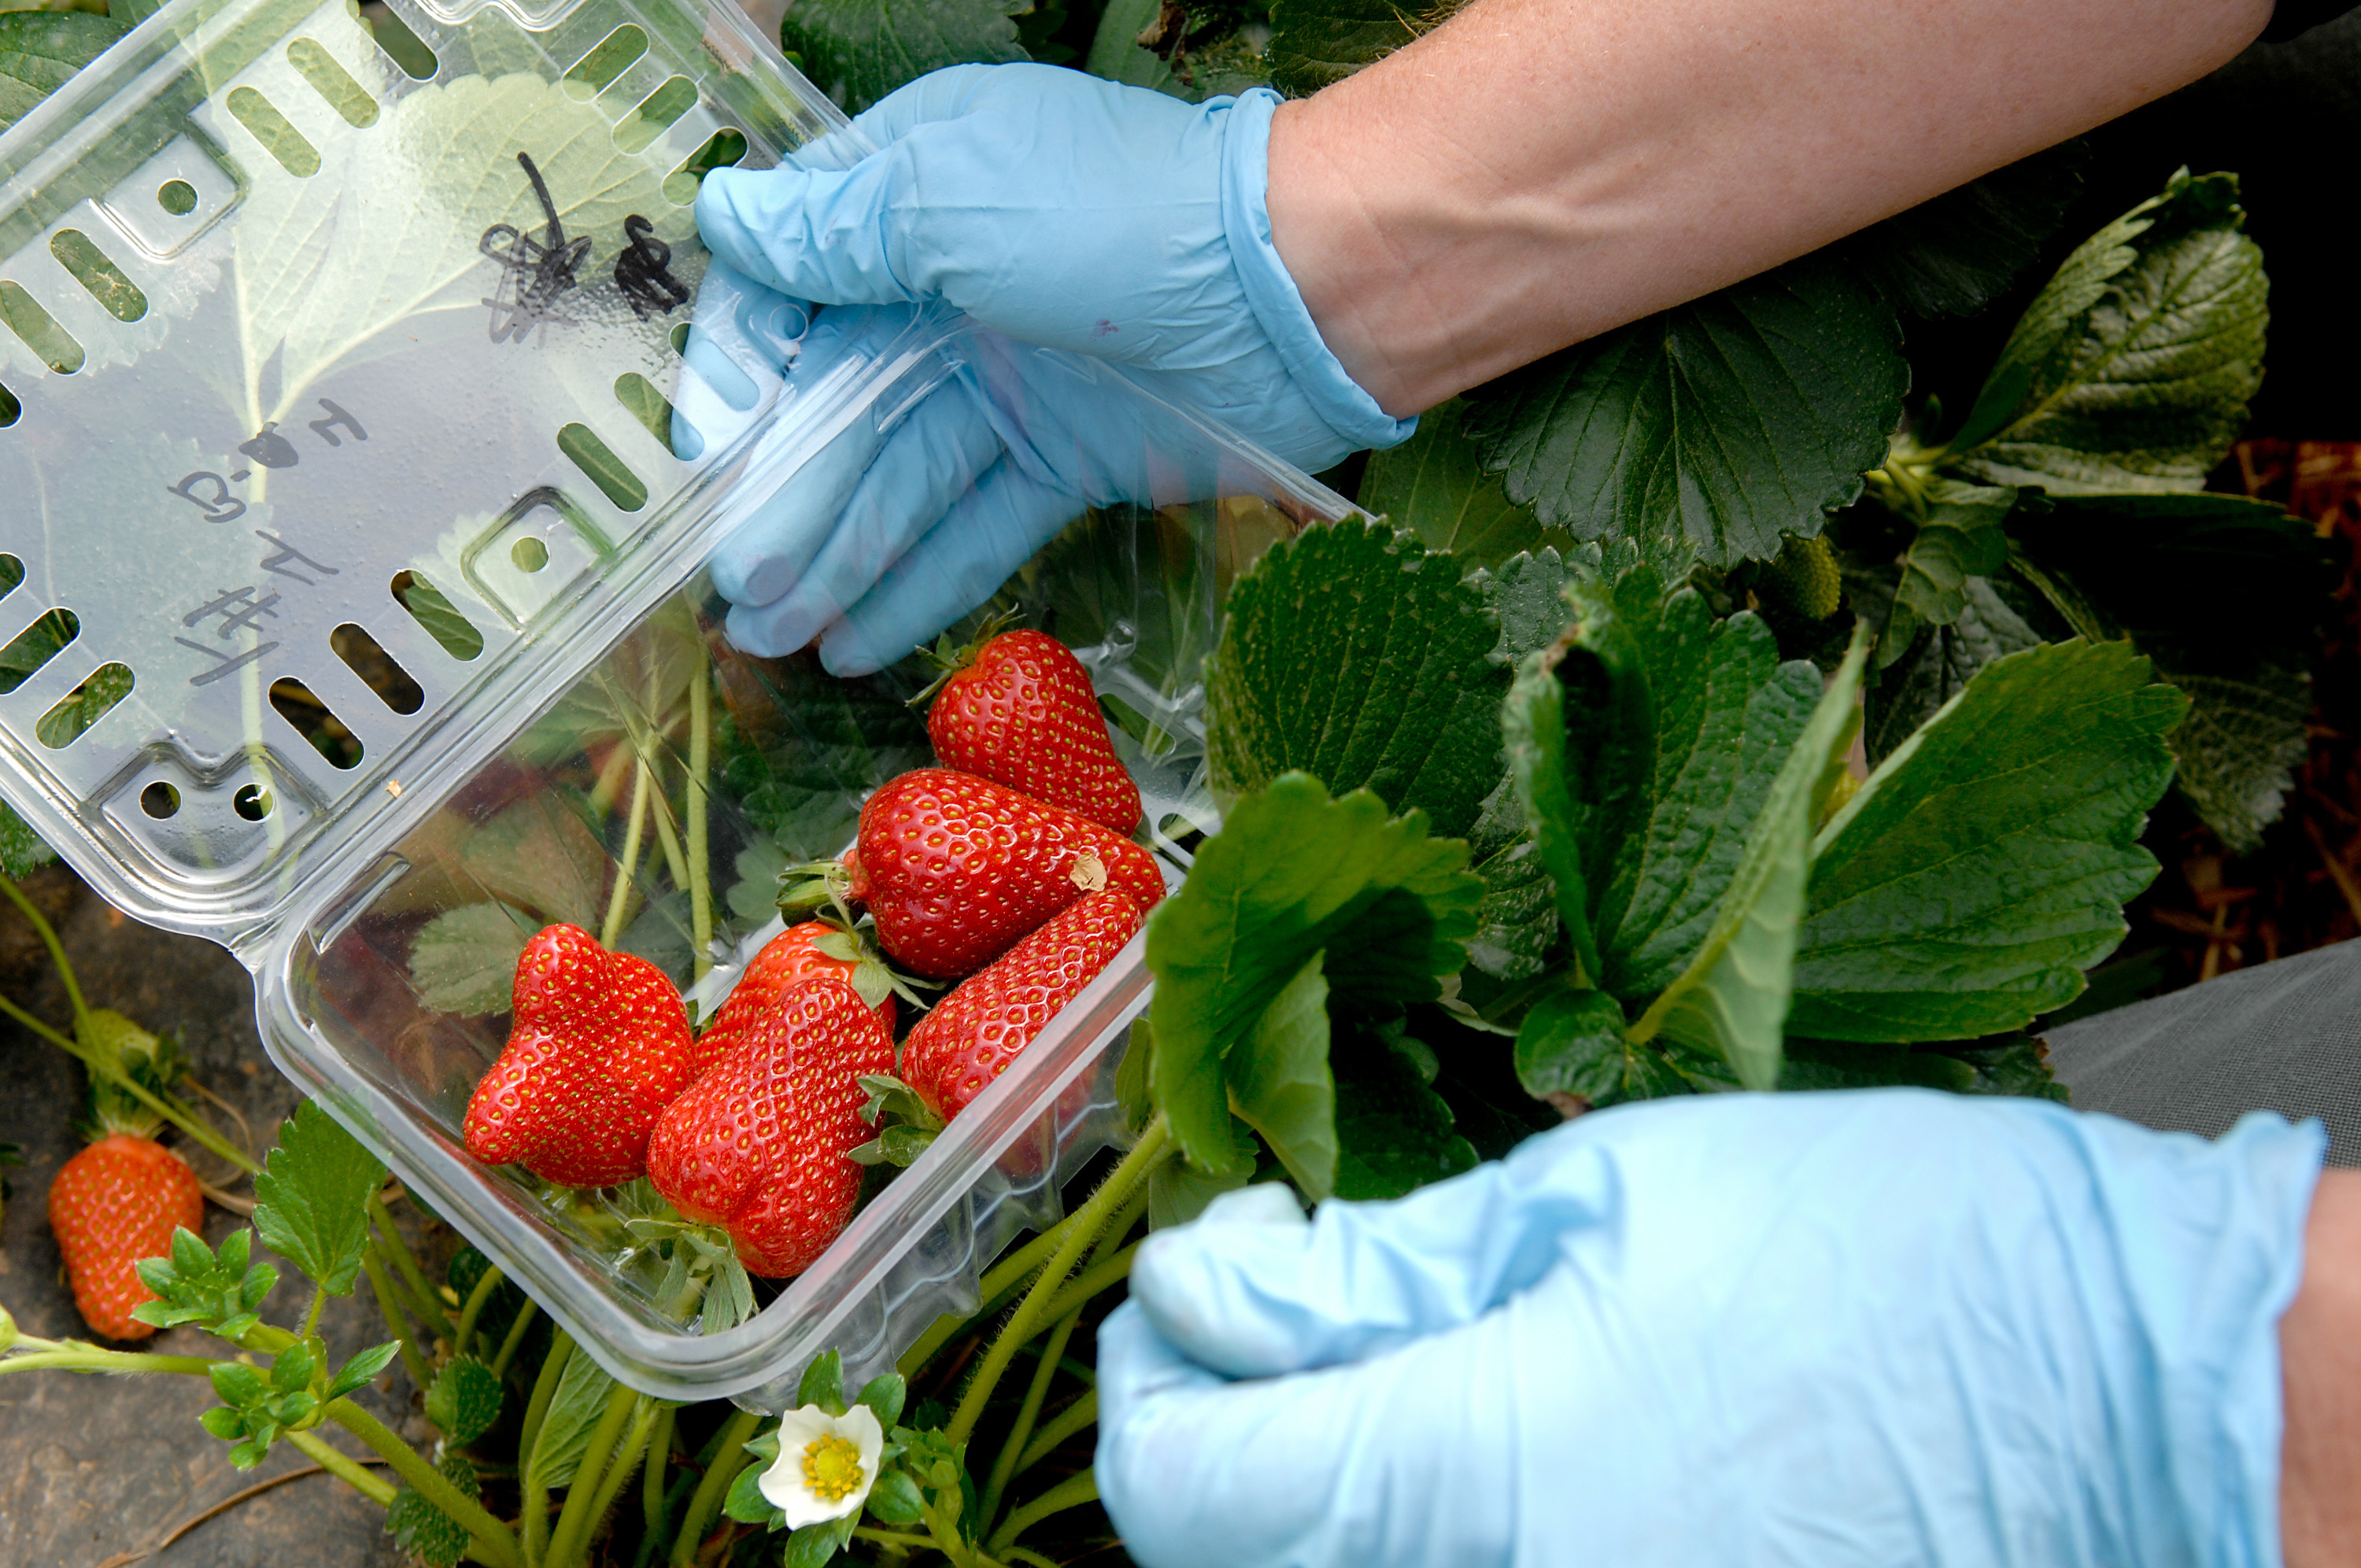 Strawberries being picked and put into containers with glove-covered hands